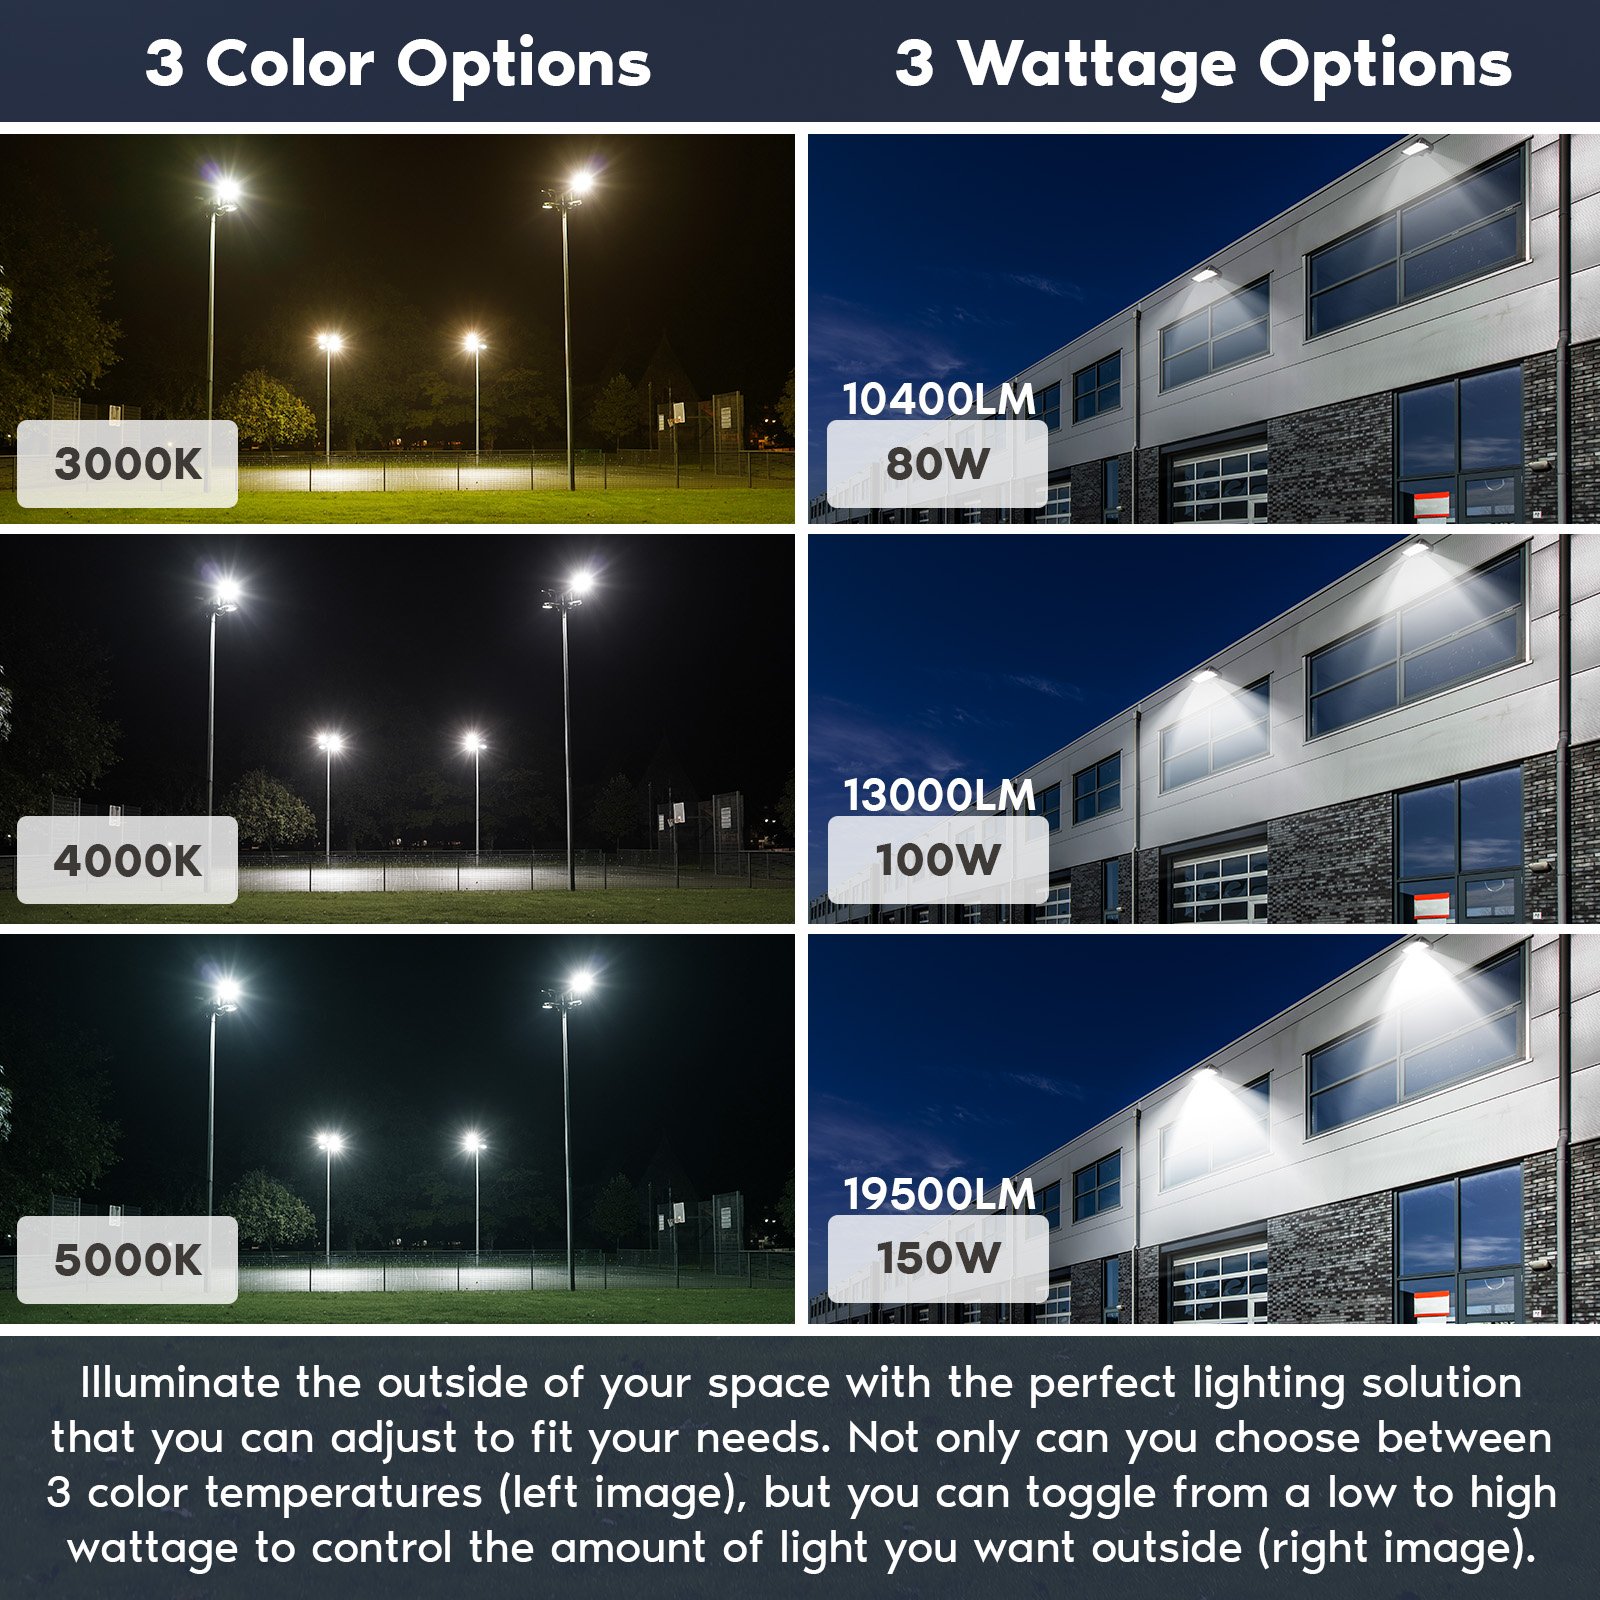 Luxrite 80/100/150W LED Flood Lights Outdoor Dusk to Dawn Up to 19500  Lumens 3CCT Selectable IP65 Waterproof DLC, UL